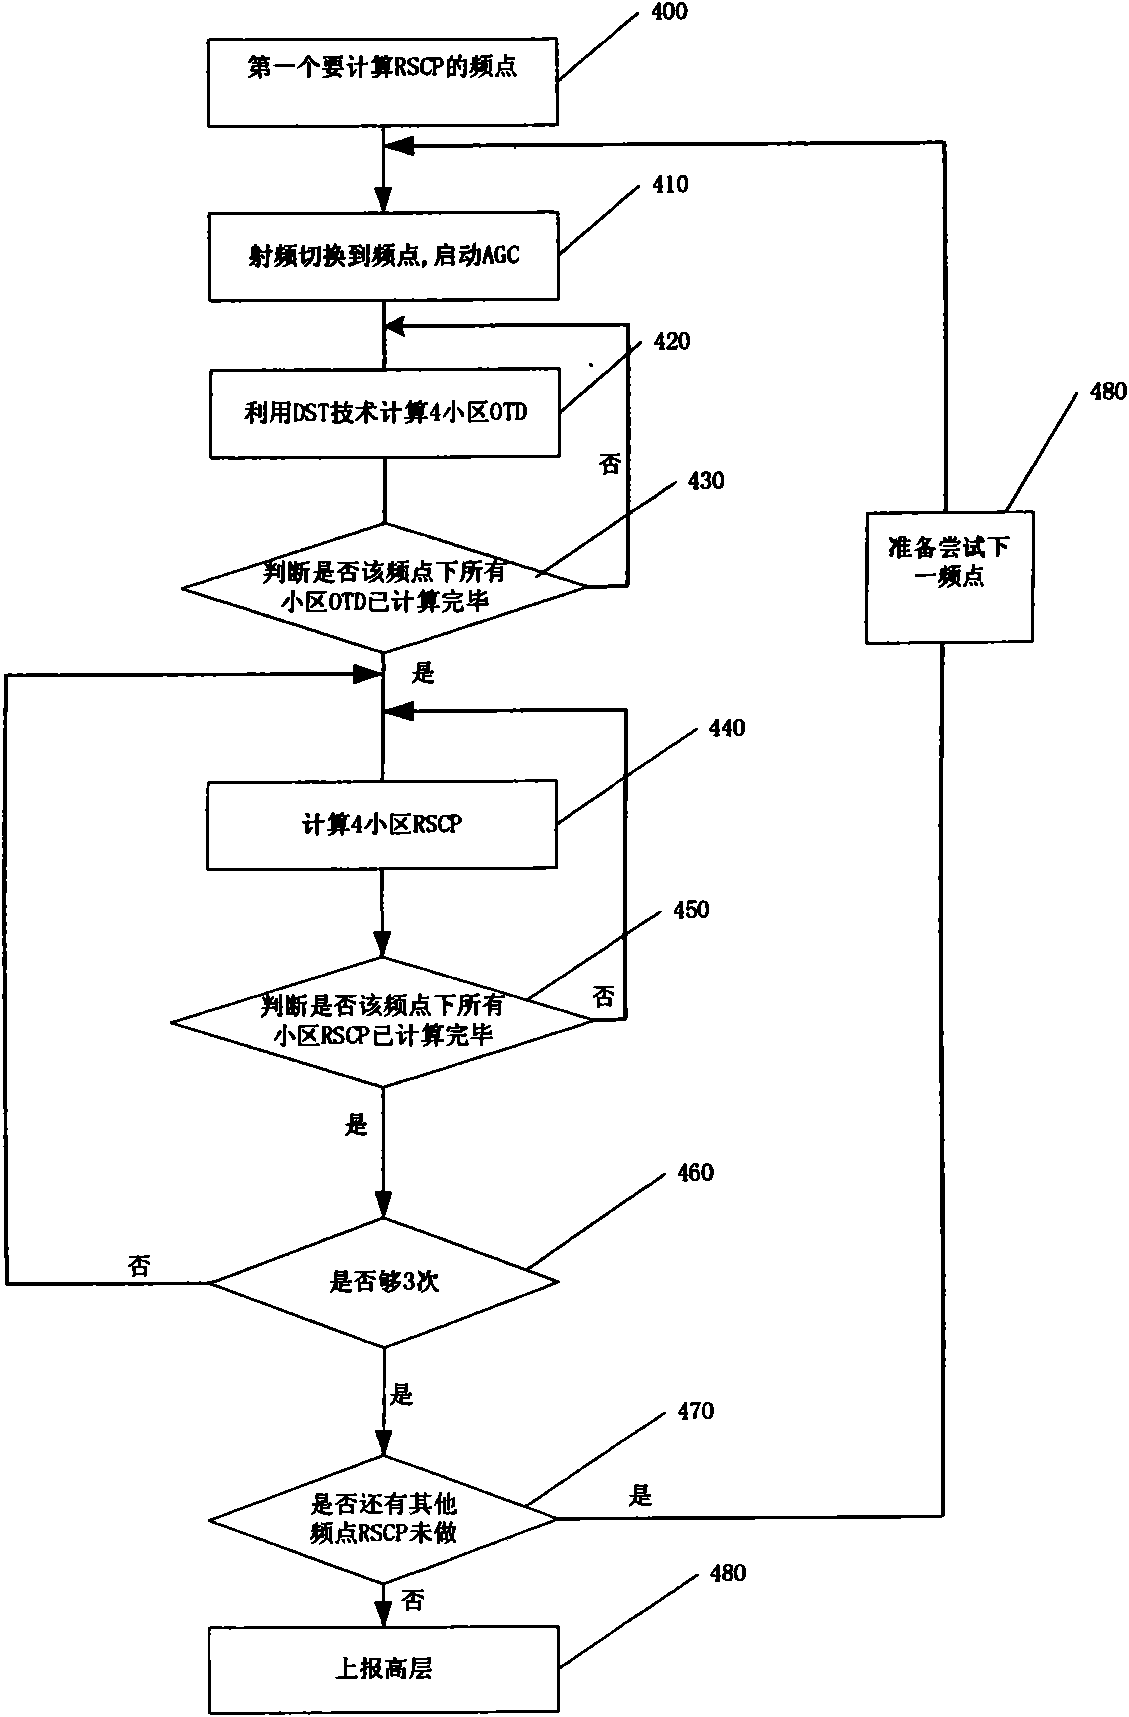 Method for completing time division neighbor measurement based on idle frame